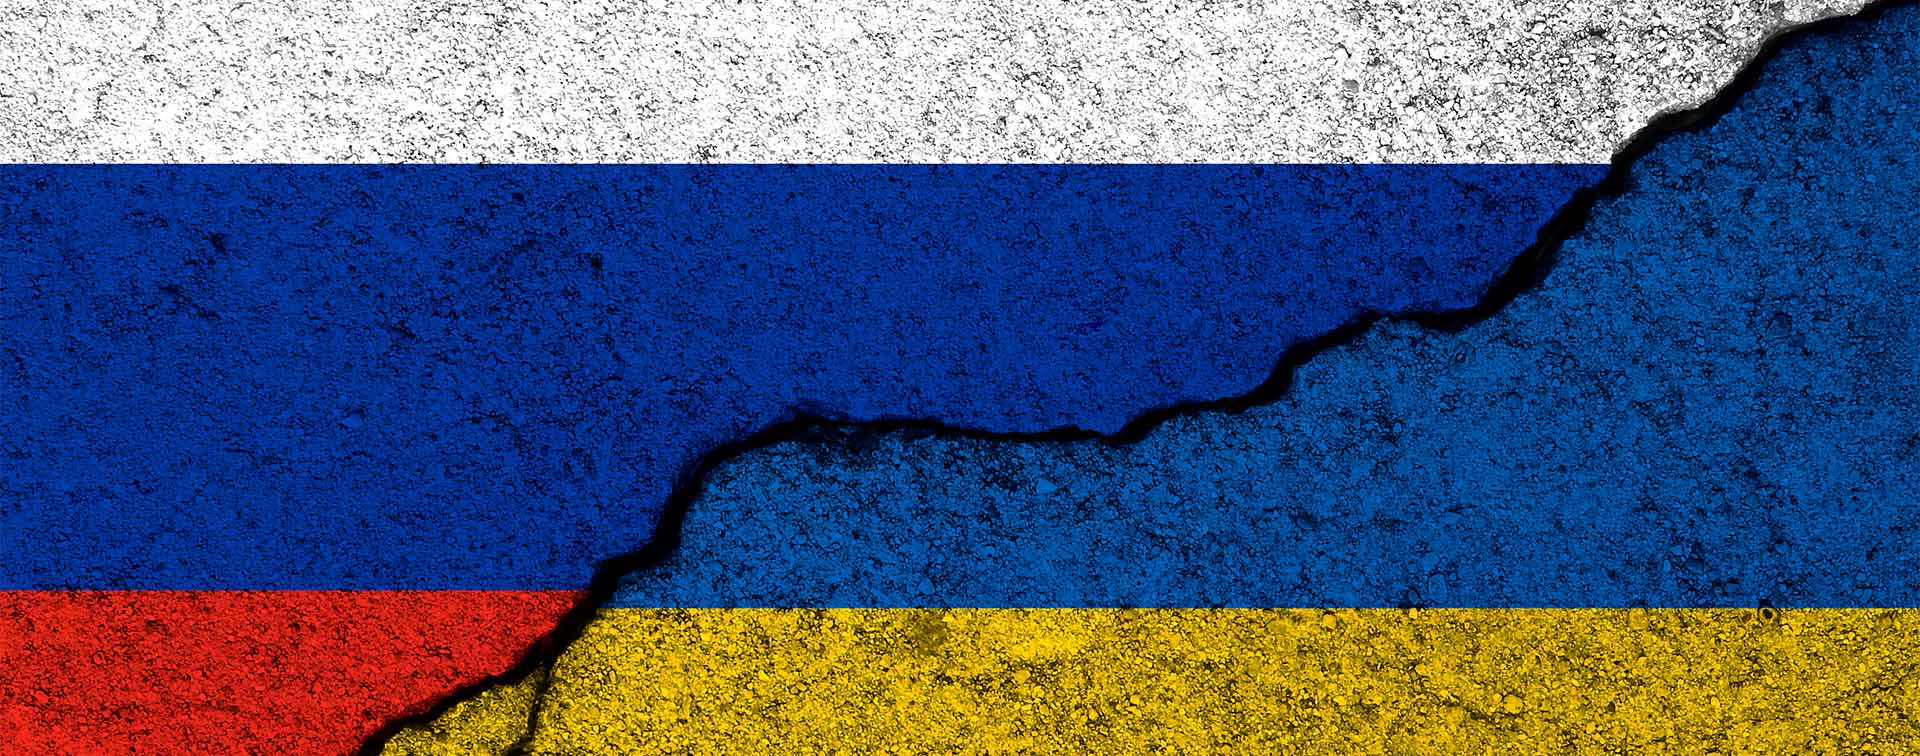 Cracking concrete with a Russian flag overlay cracking to reveal a Ukranian flag underneath.